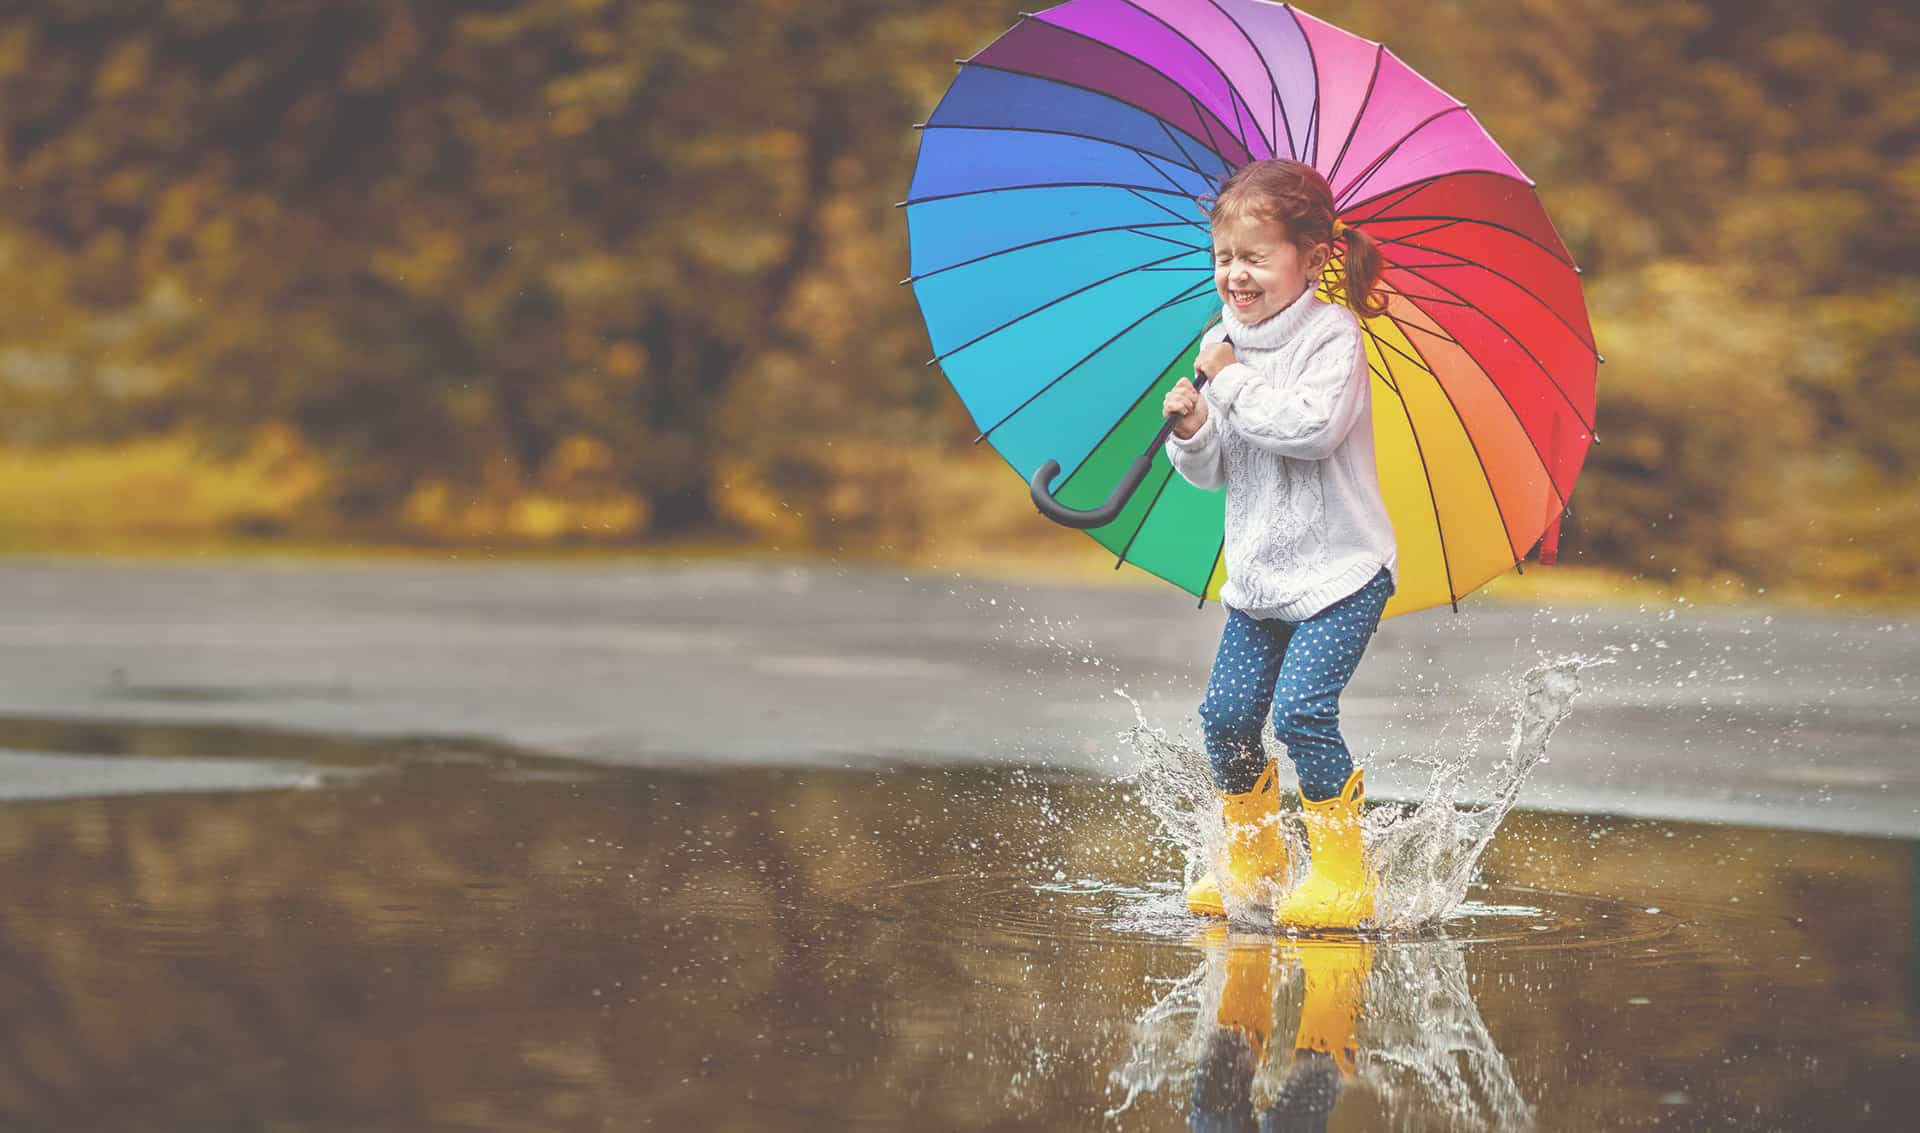 Children playing with a colorful umbrella in a lake referring to health & wellness, category from positive psychology podcast Harvesting Happiness with Lisa Cypers Kamen.